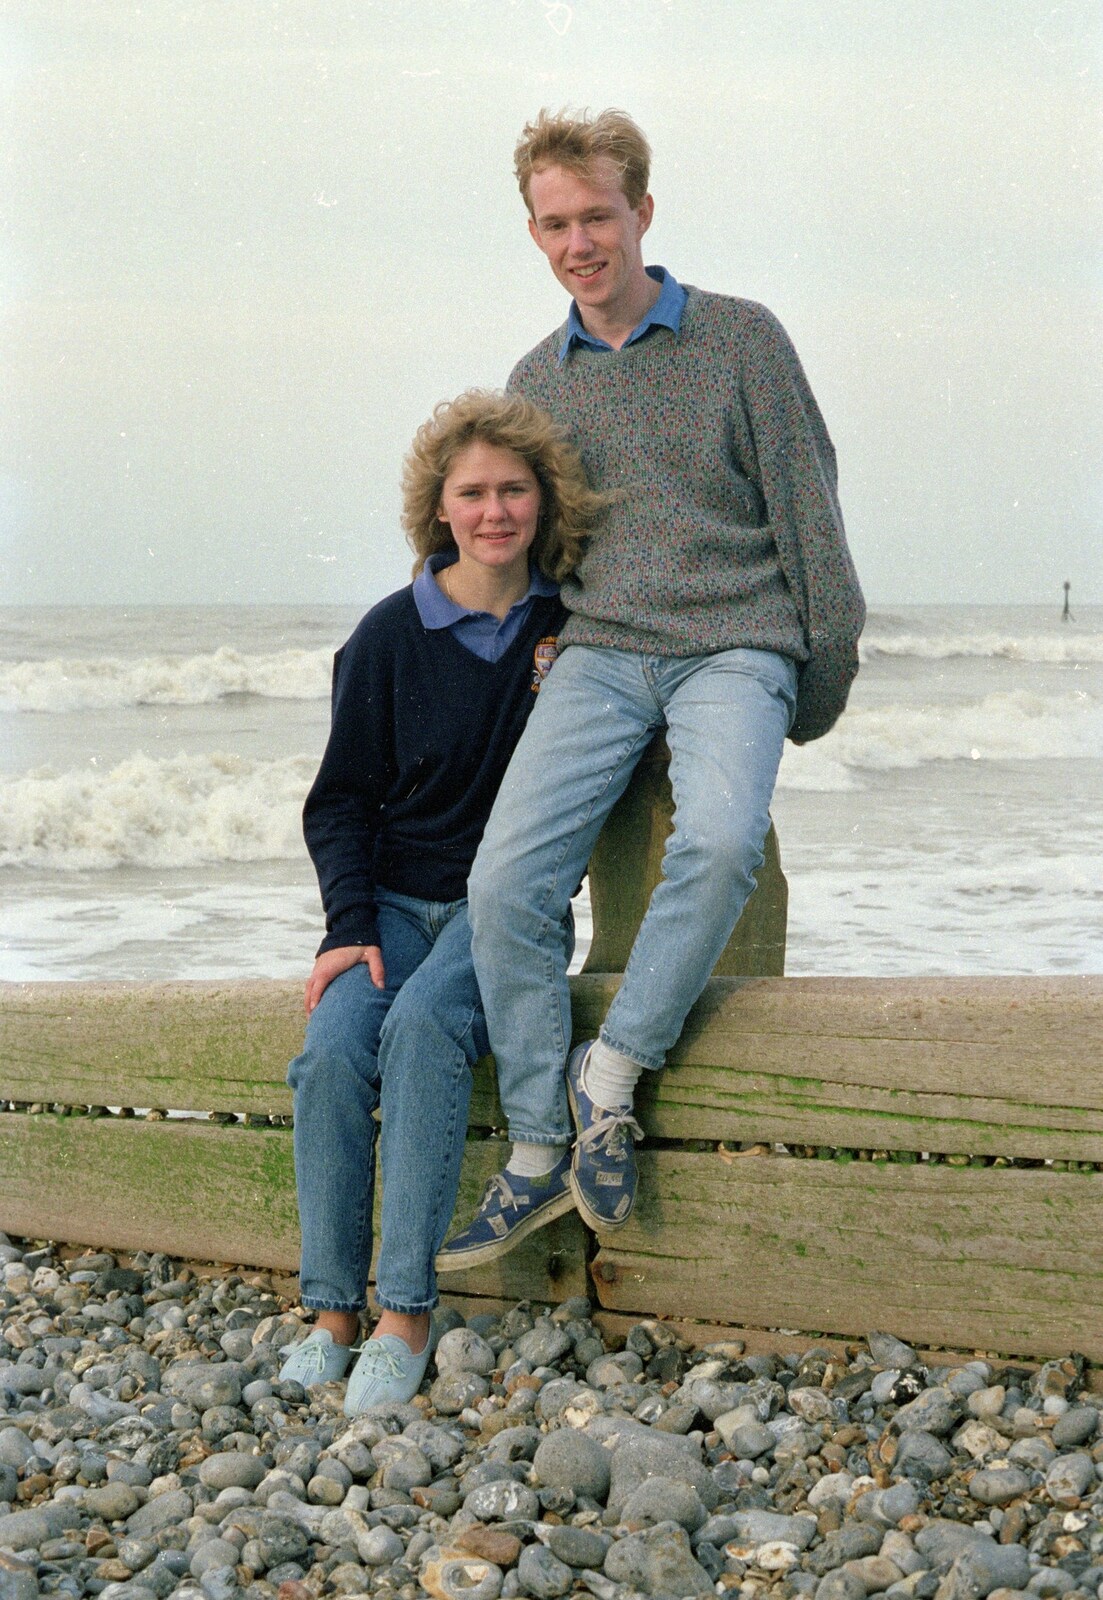 Emma and Martin from A Trip to the Beach, East Runton, Norfolk - 6th July 1988